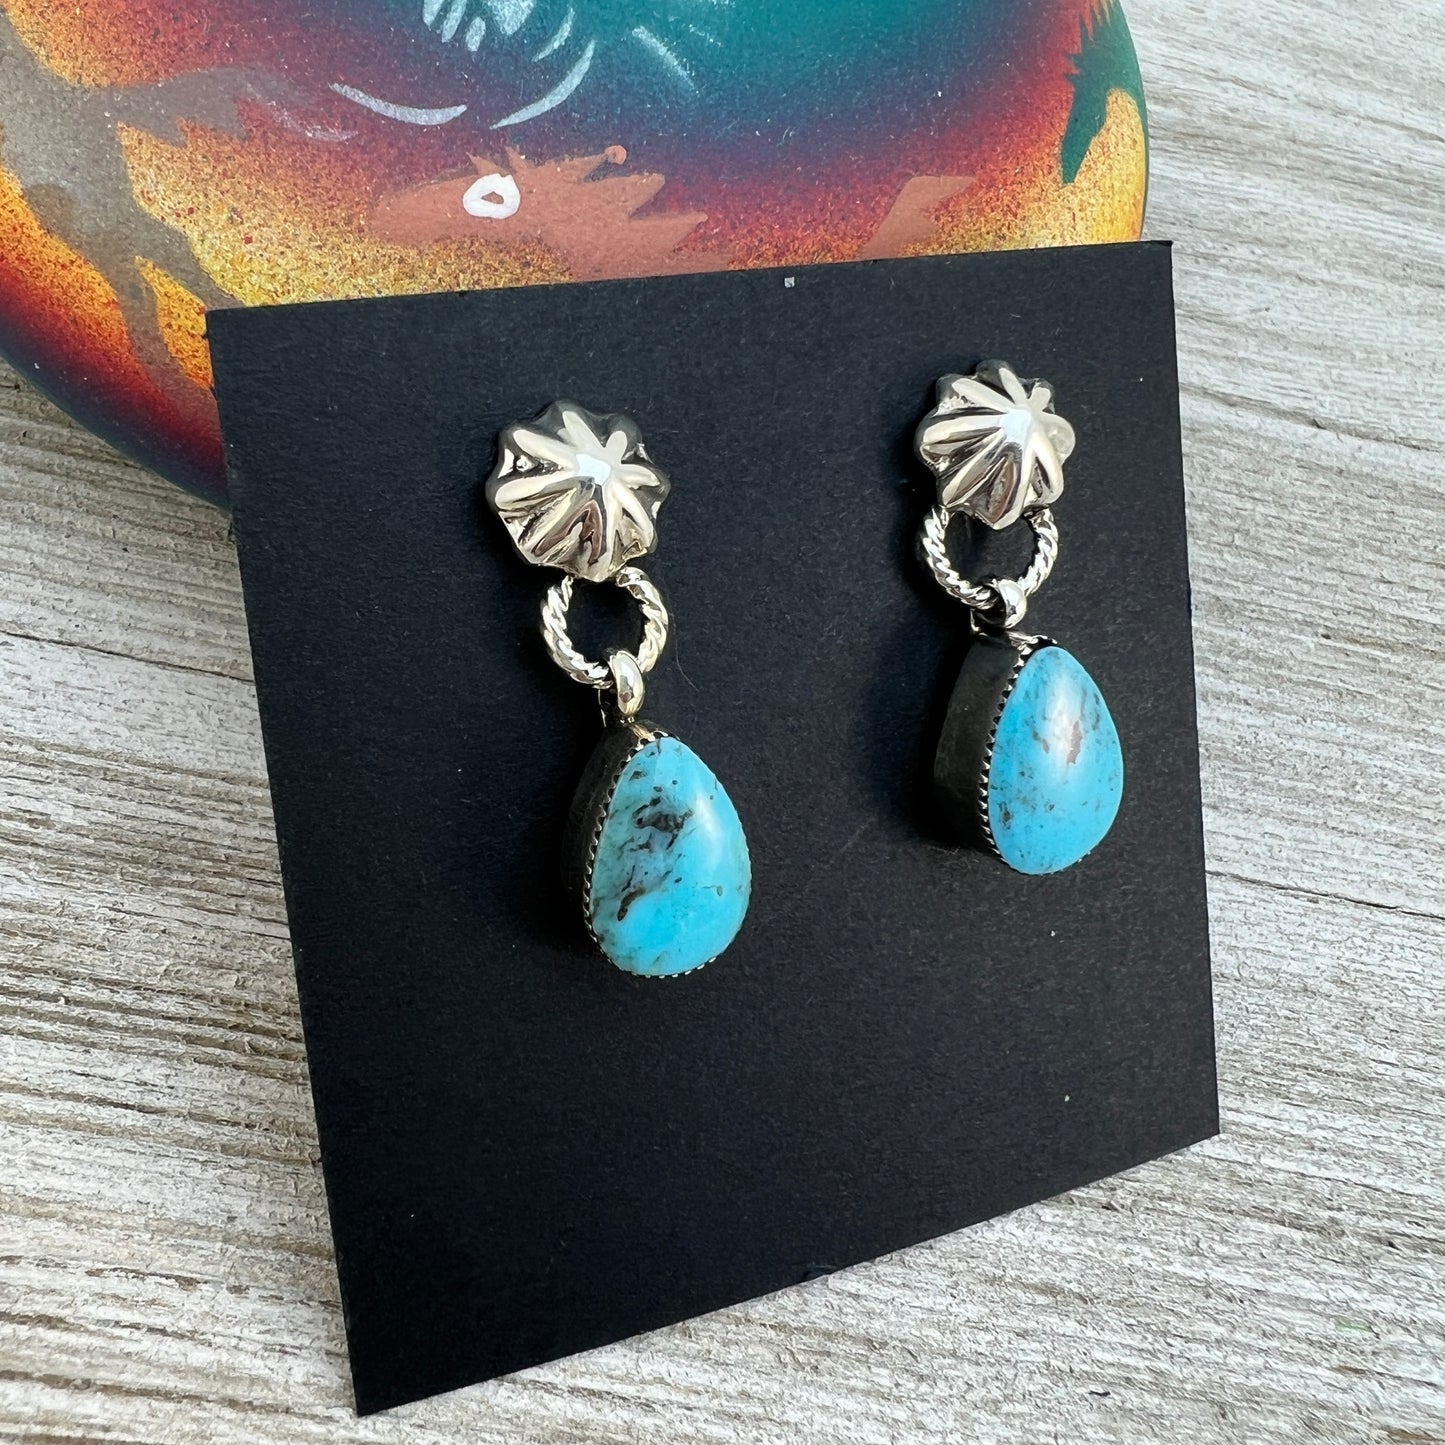 Turquoise teardrop dangle earrings #1 with small concho button post, sterling silver, Kingman Turquoise, Navajo handmade by Sheena Jack